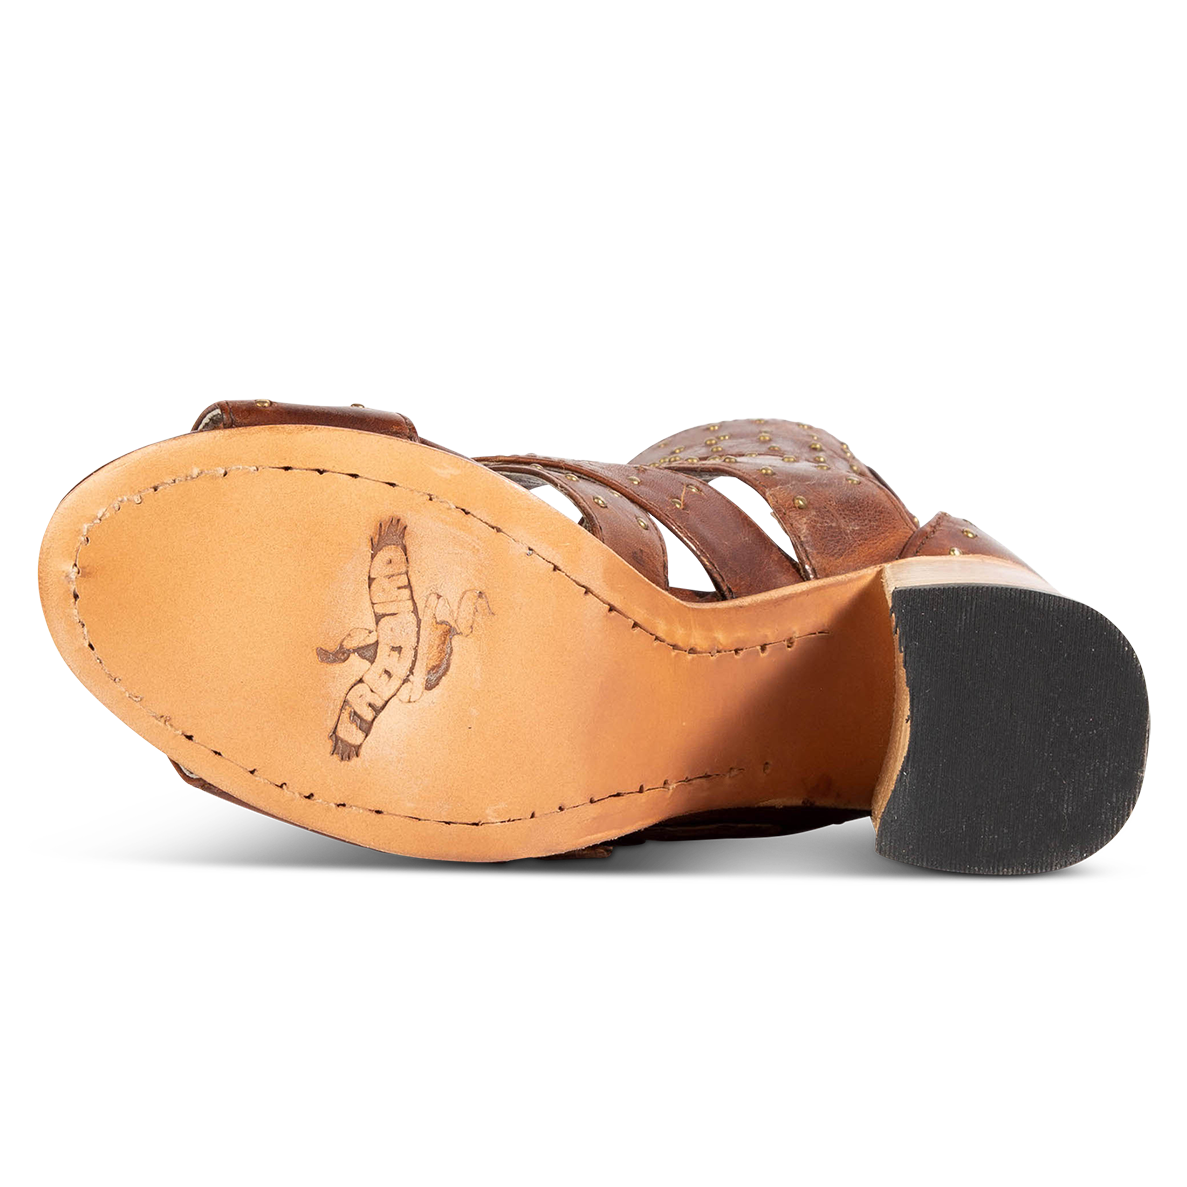 Leather sole imprinted with FREEBIRD on women's Tanica cognac sandal